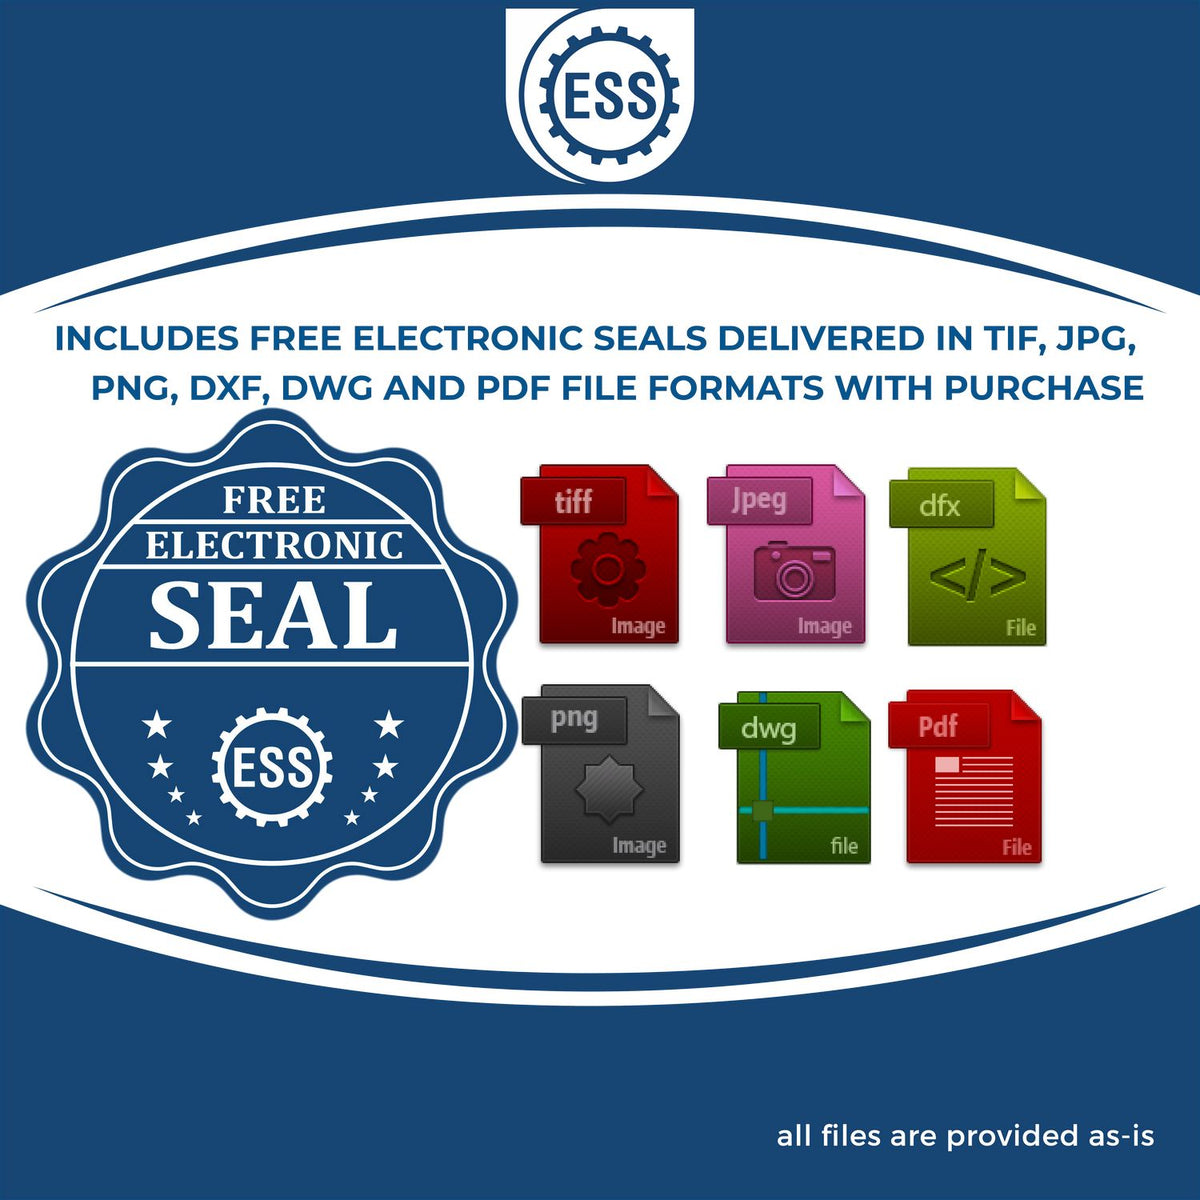 An infographic for the free electronic seal for the Long Reach Nevada Land Surveyor Seal illustrating the different file type icons such as DXF, DWG, TIF, JPG and PNG.